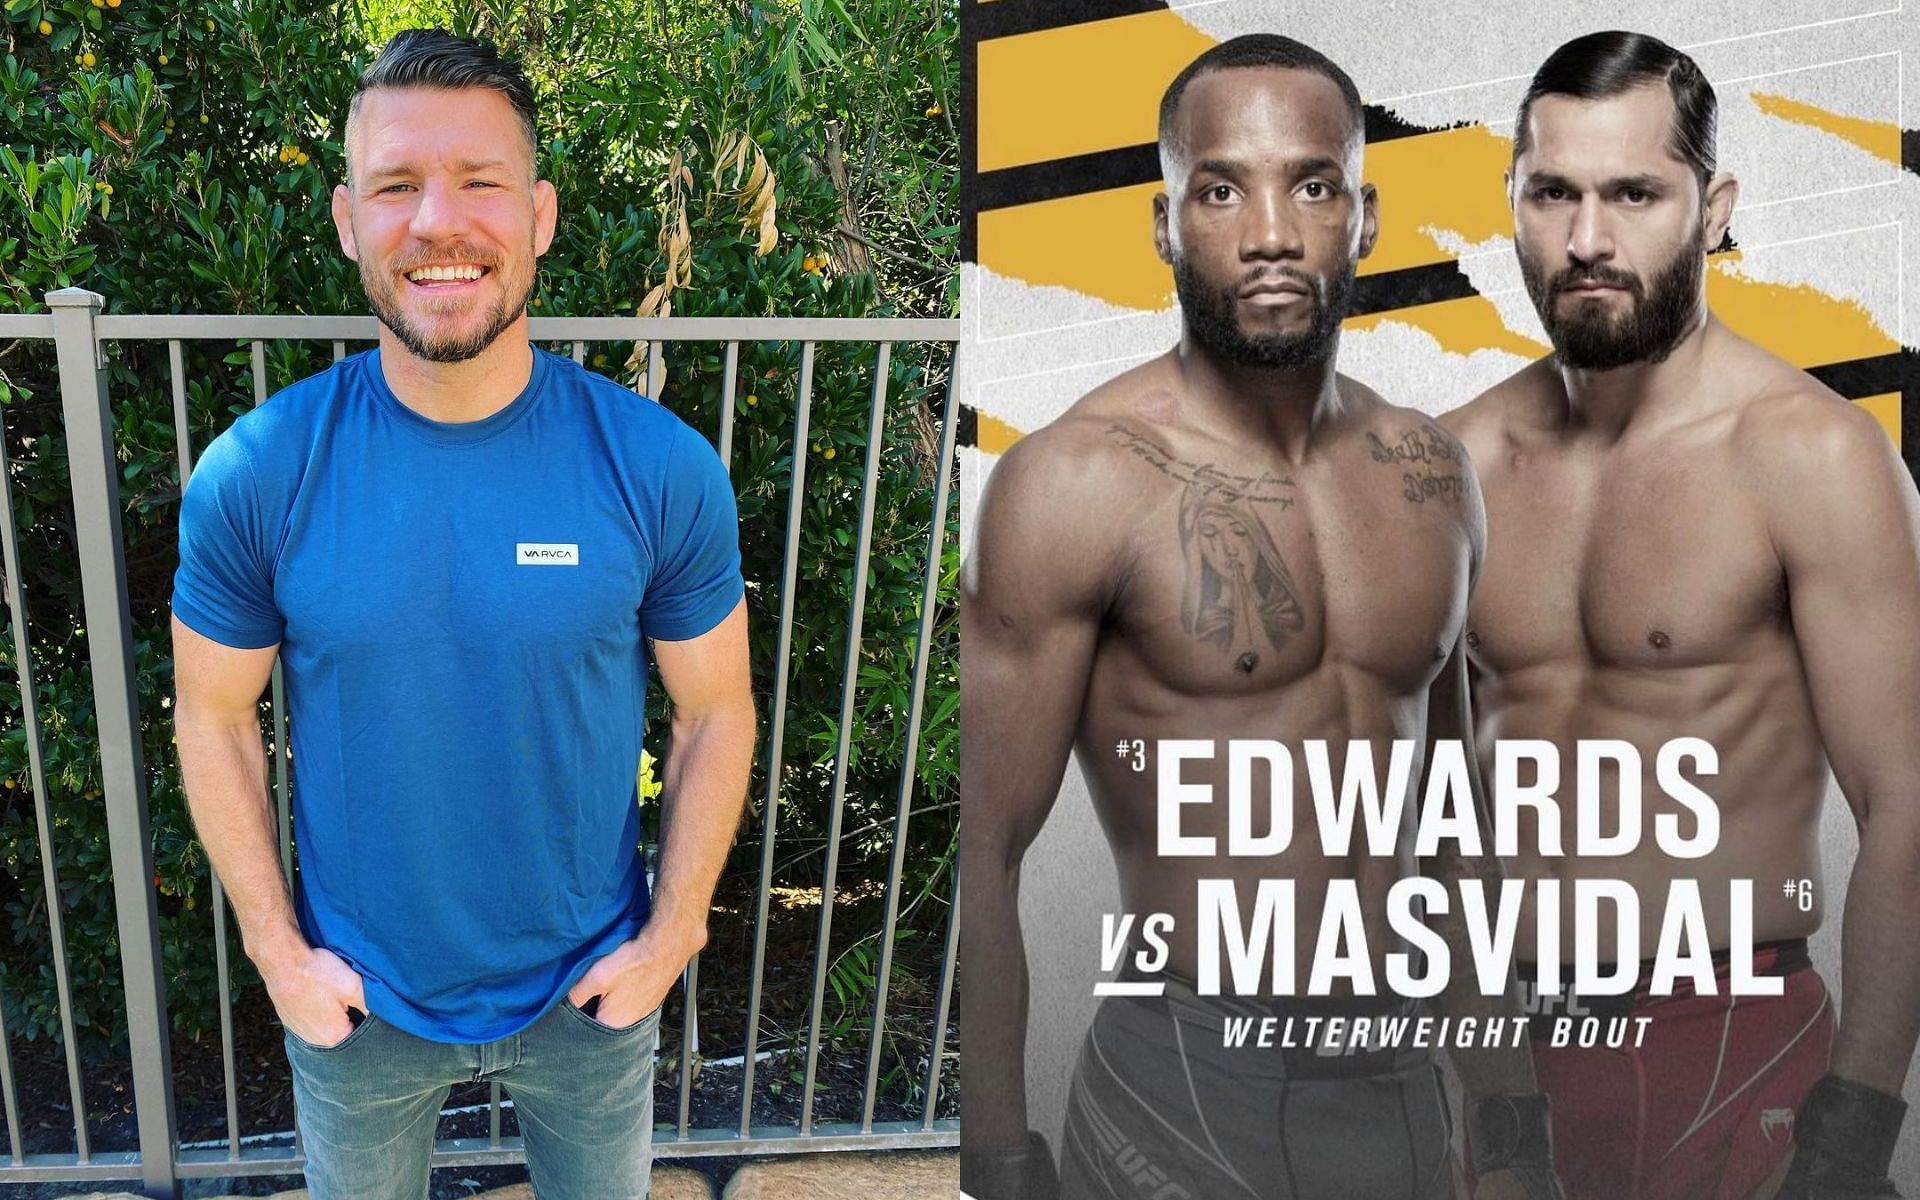 Michael Bisping (L) and Leon Edwards vs Jorge Masvidal poster (R) via Instagram @mikebisping and @leonedwardsmma